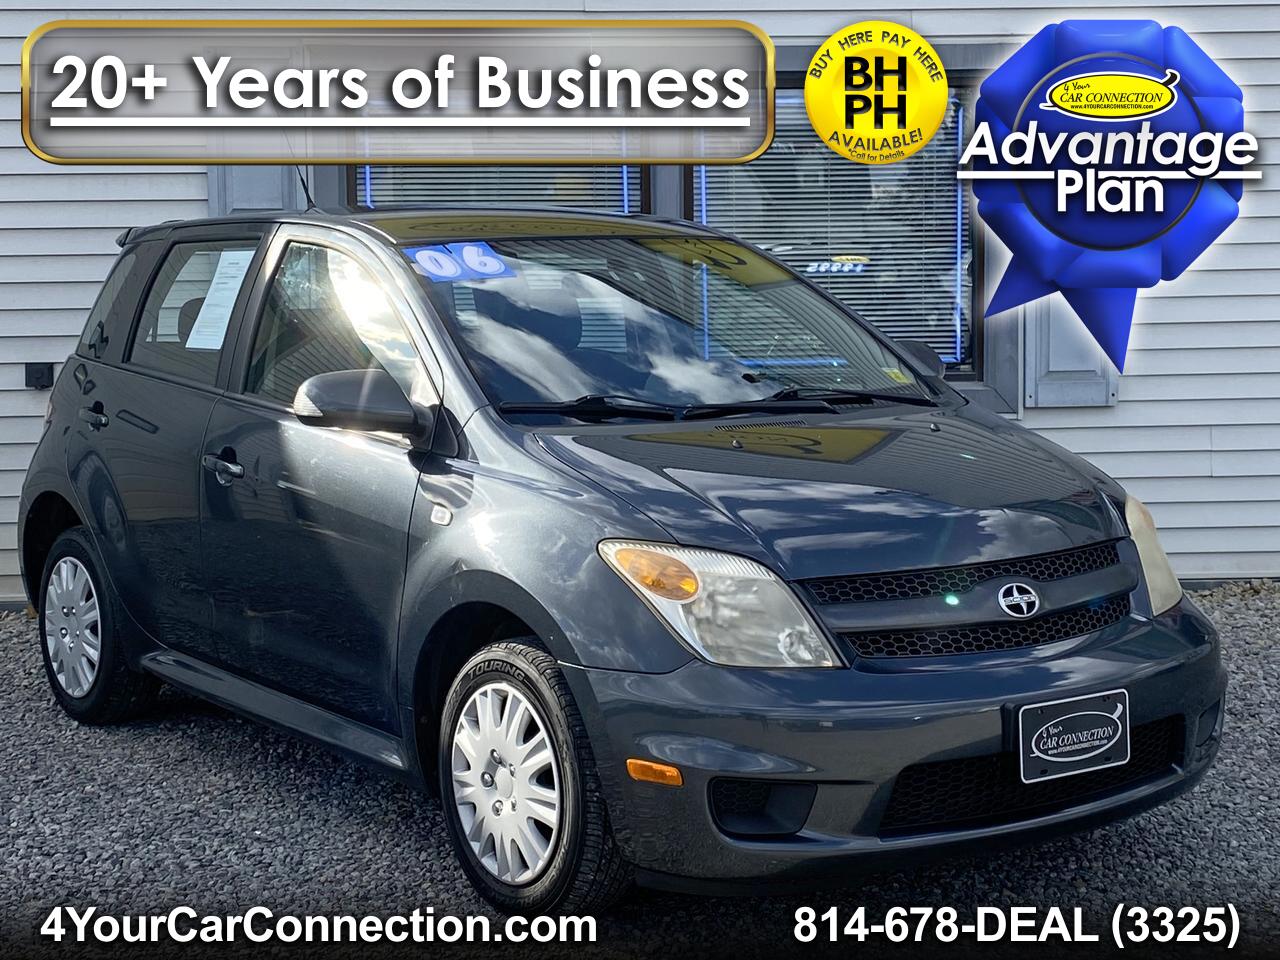 Used 2006 Scion xA in Cranberry PA